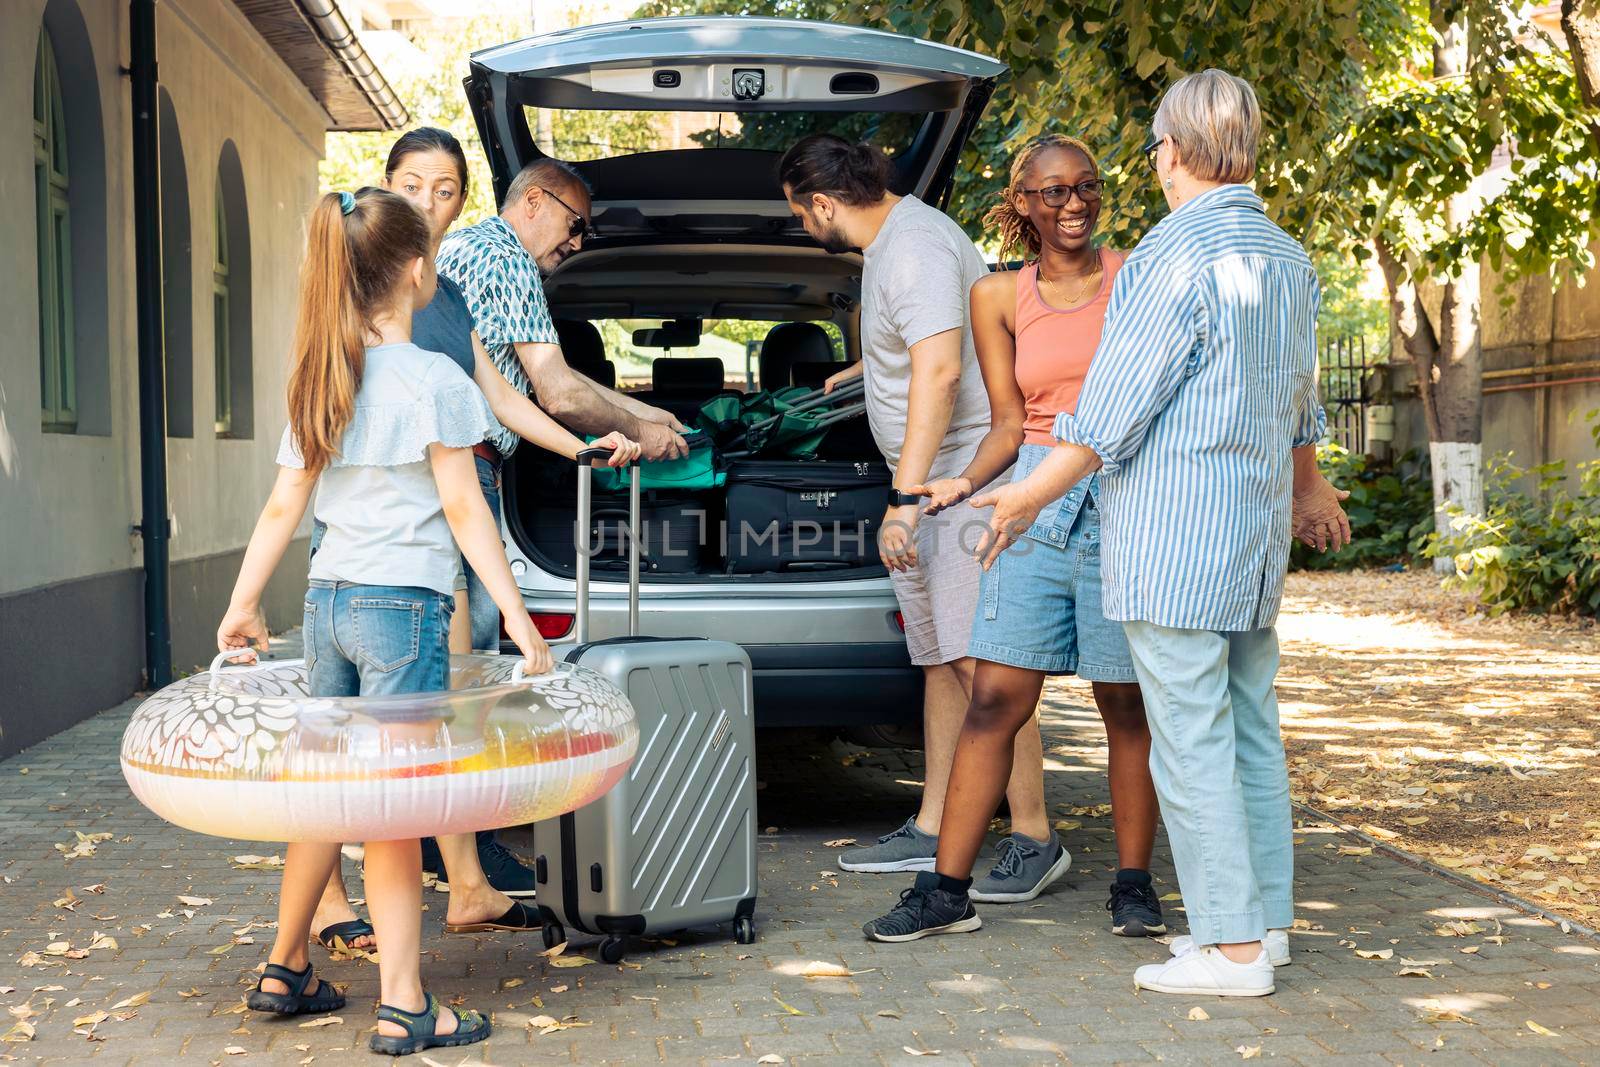 Multiethnic family and friends travelling on vacation, preparing to leave on summer holiday and loading baggage in car trunk. People sitting in driveway to go to seaside adventure trip.